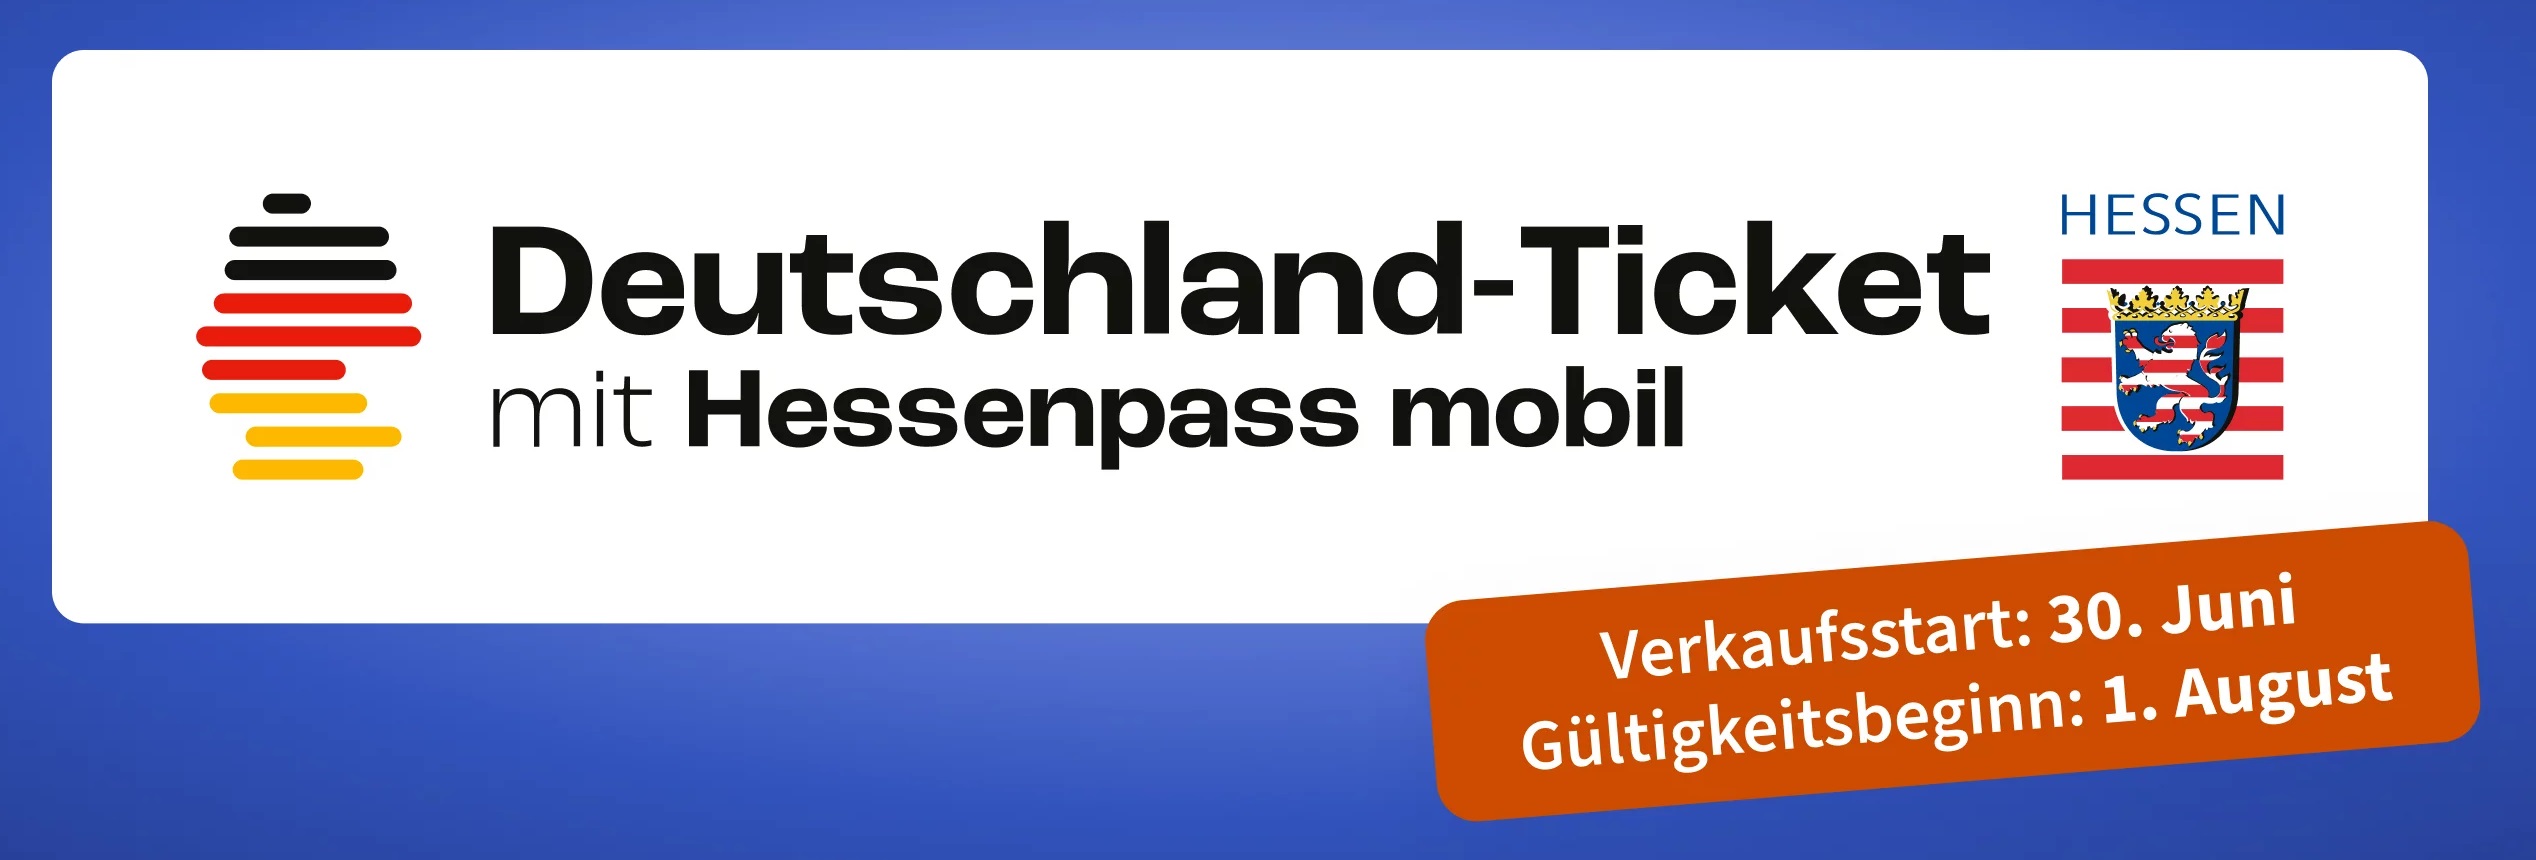 Lettering Deutschland-Ticket with Hessenpass mobil, next to it the logos of Hesse and the Federal Republic of Germany